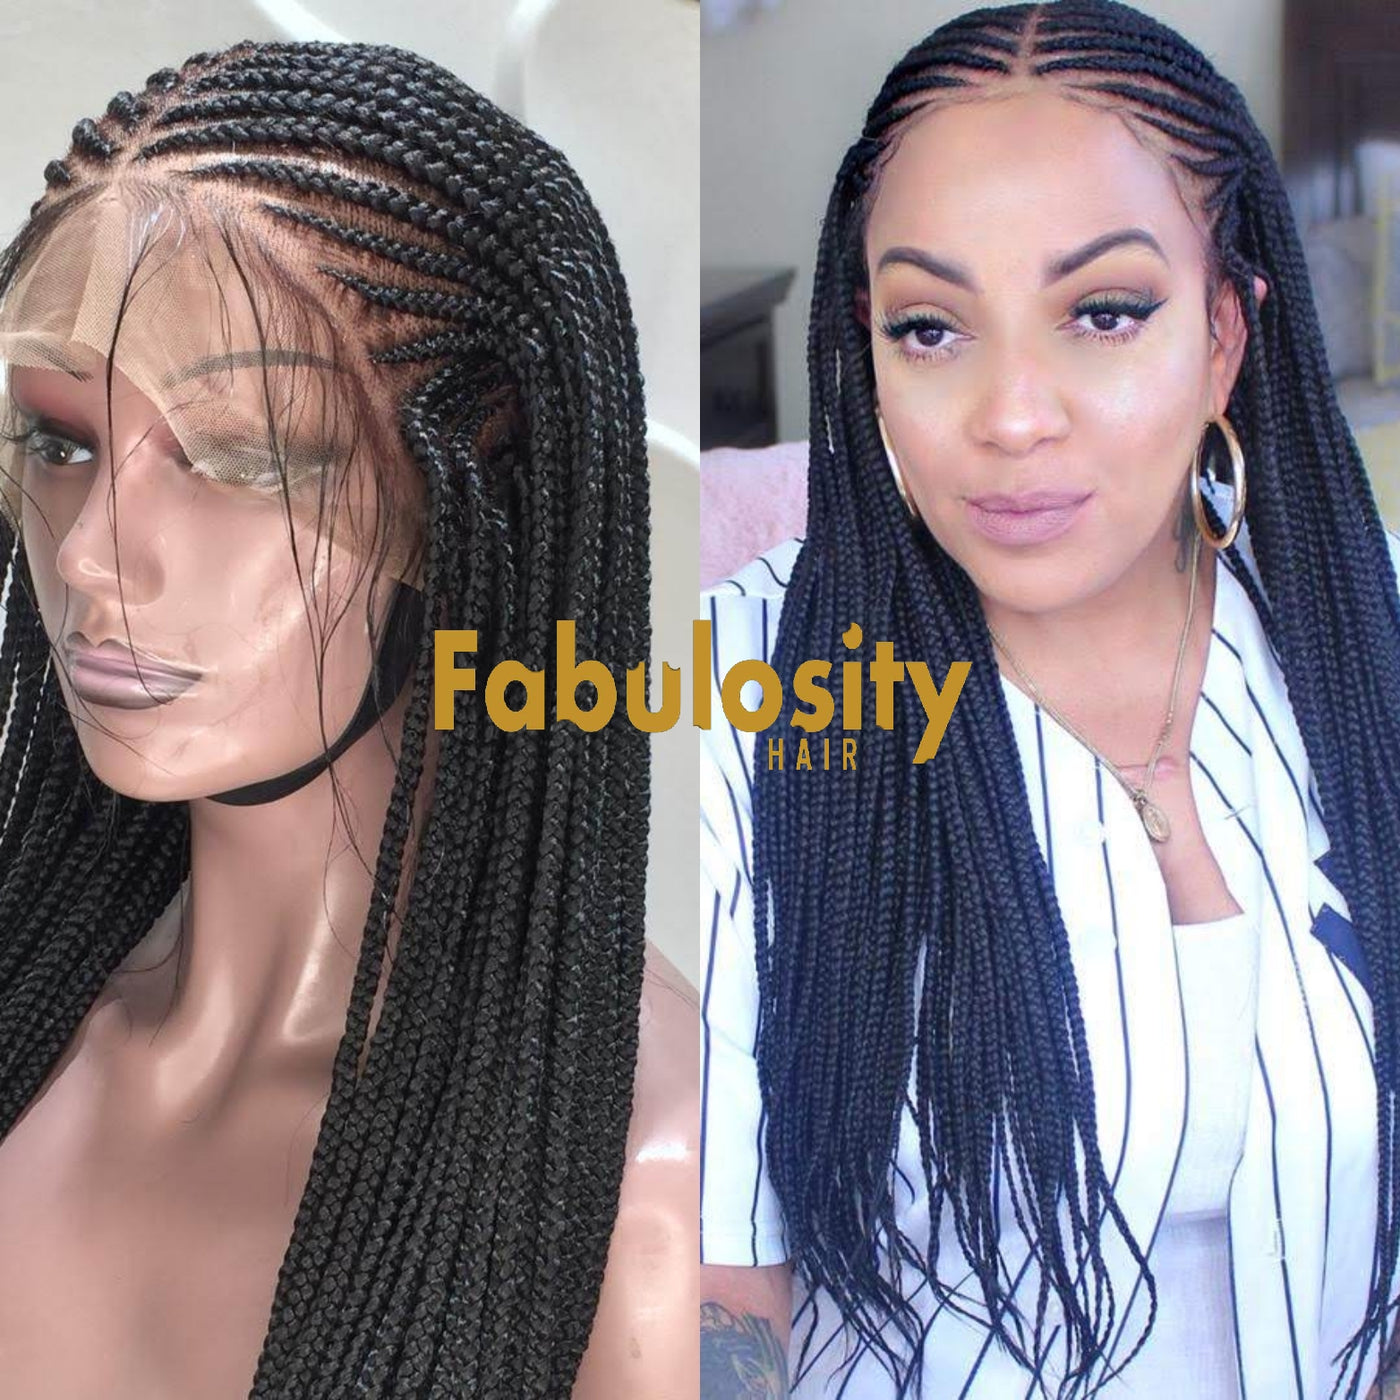 Ms Muffins Unit – Fabulosity Hair